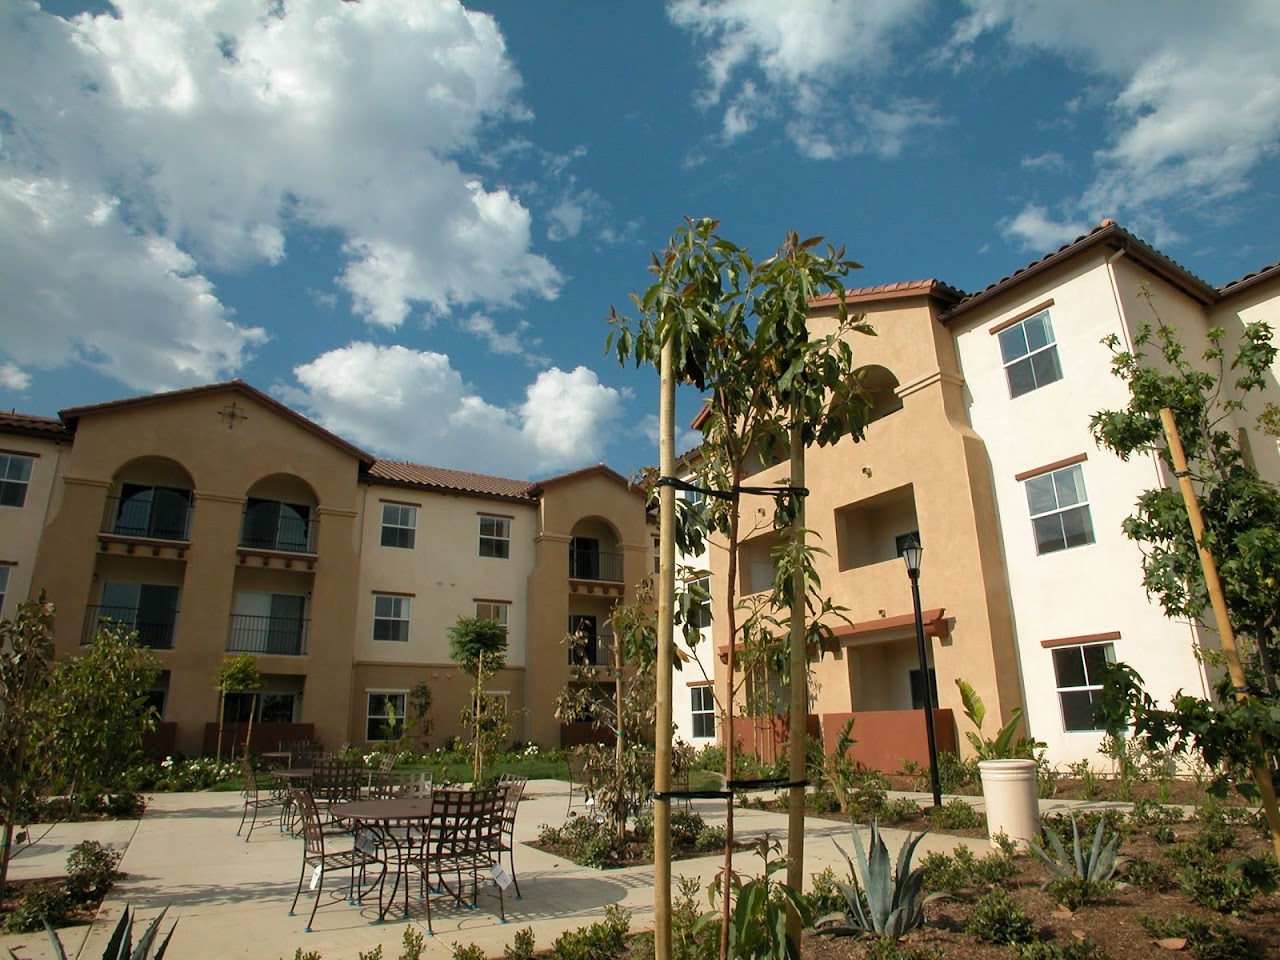 Photo of THE GARDENS AT SIERRA. Affordable housing located at 16838 CERES AVE FONTANA, CA 92335